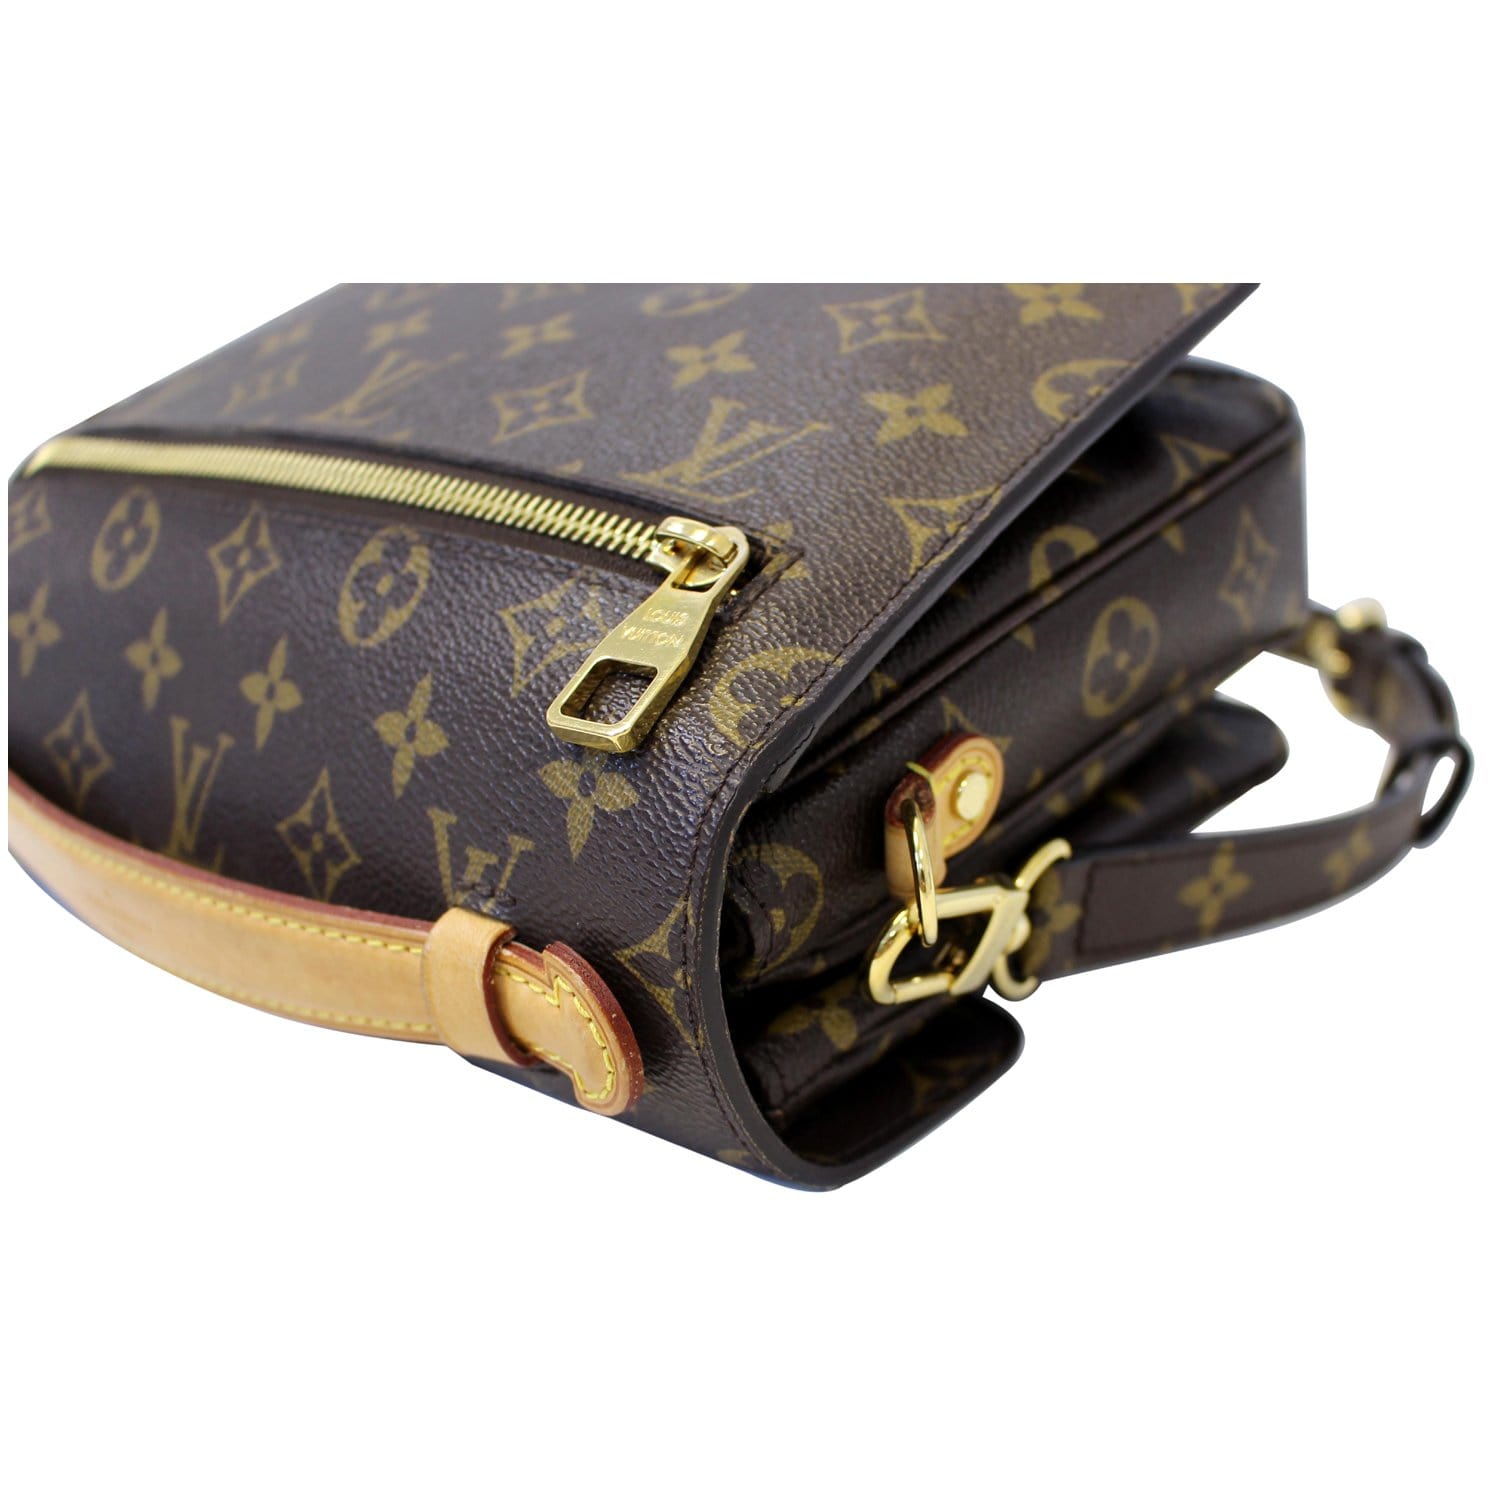 Shop for Louis Vuitton Monogram Canvas Leather e Crossbody Bag -  Shipped from USA